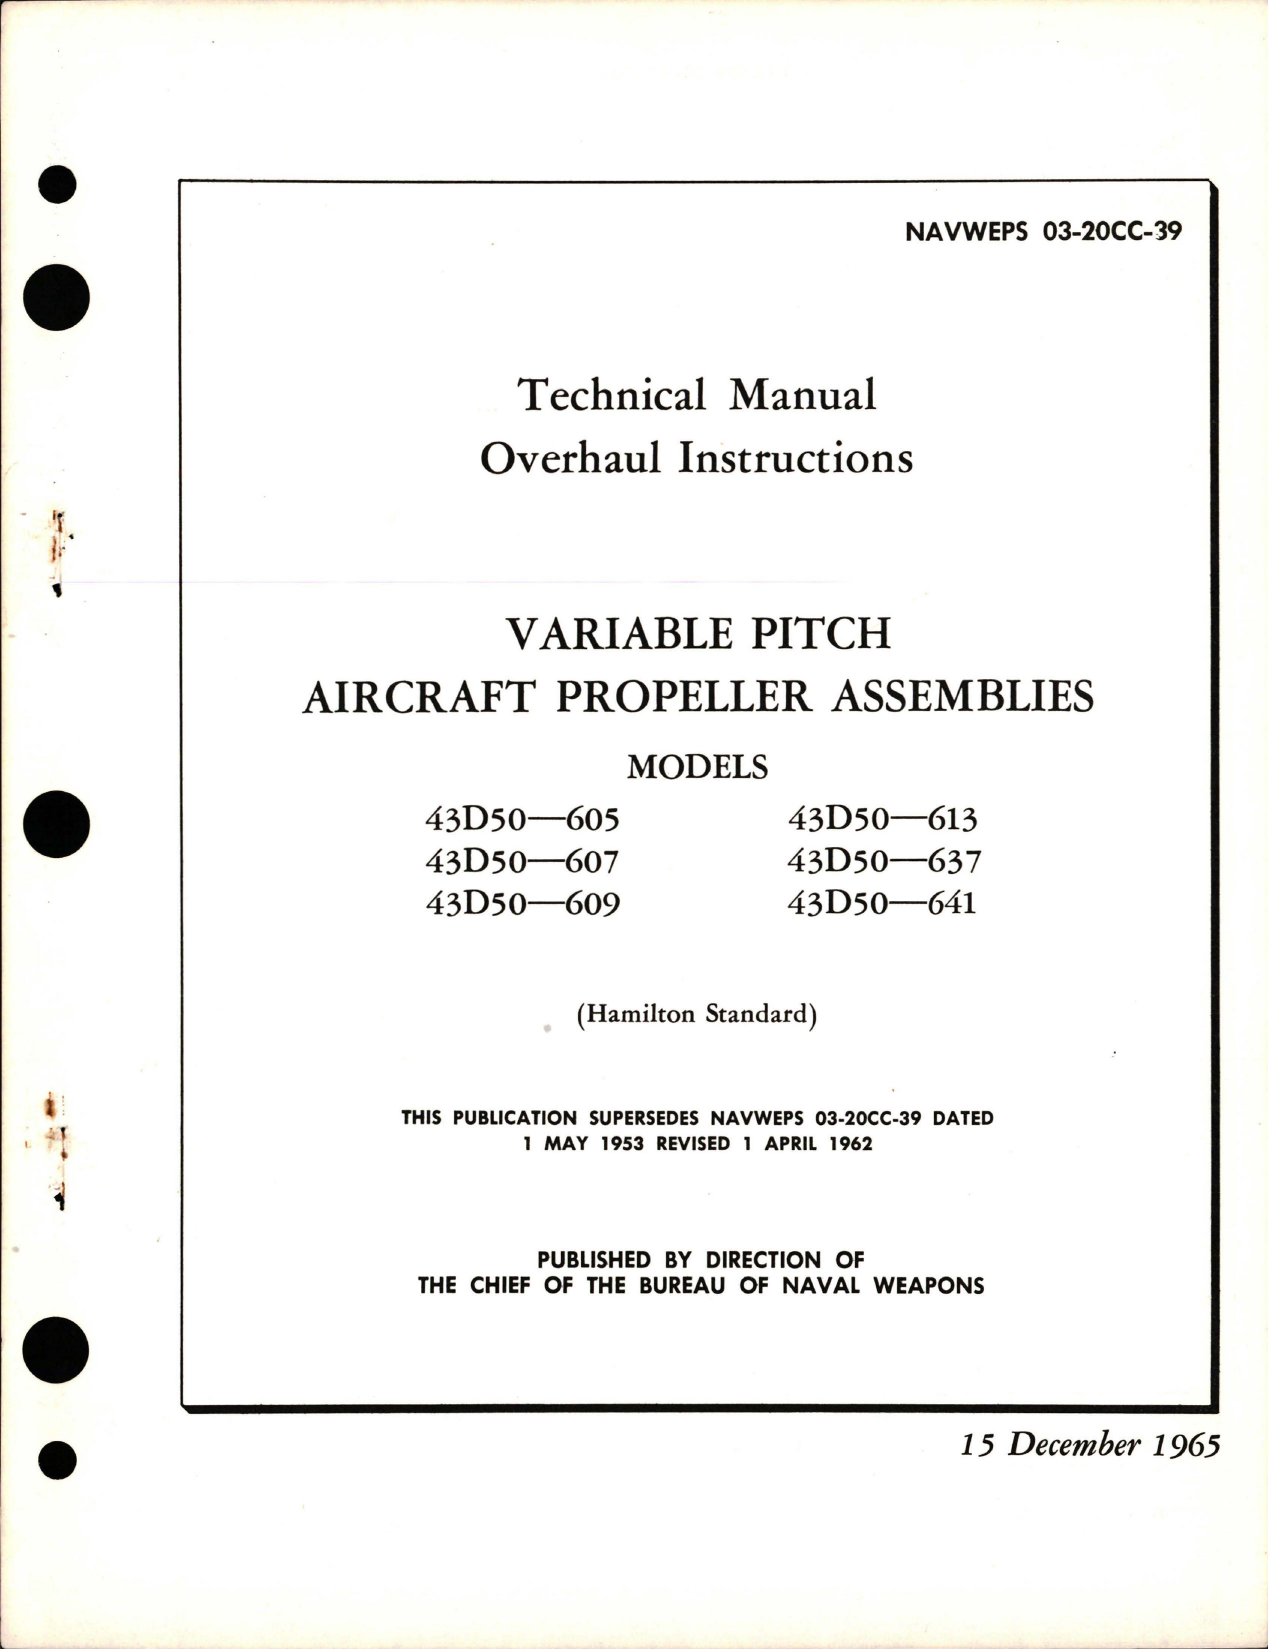 Sample page 1 from AirCorps Library document: Overhaul Instructions for Variable Pitch Aircraft Propeller Assemblies